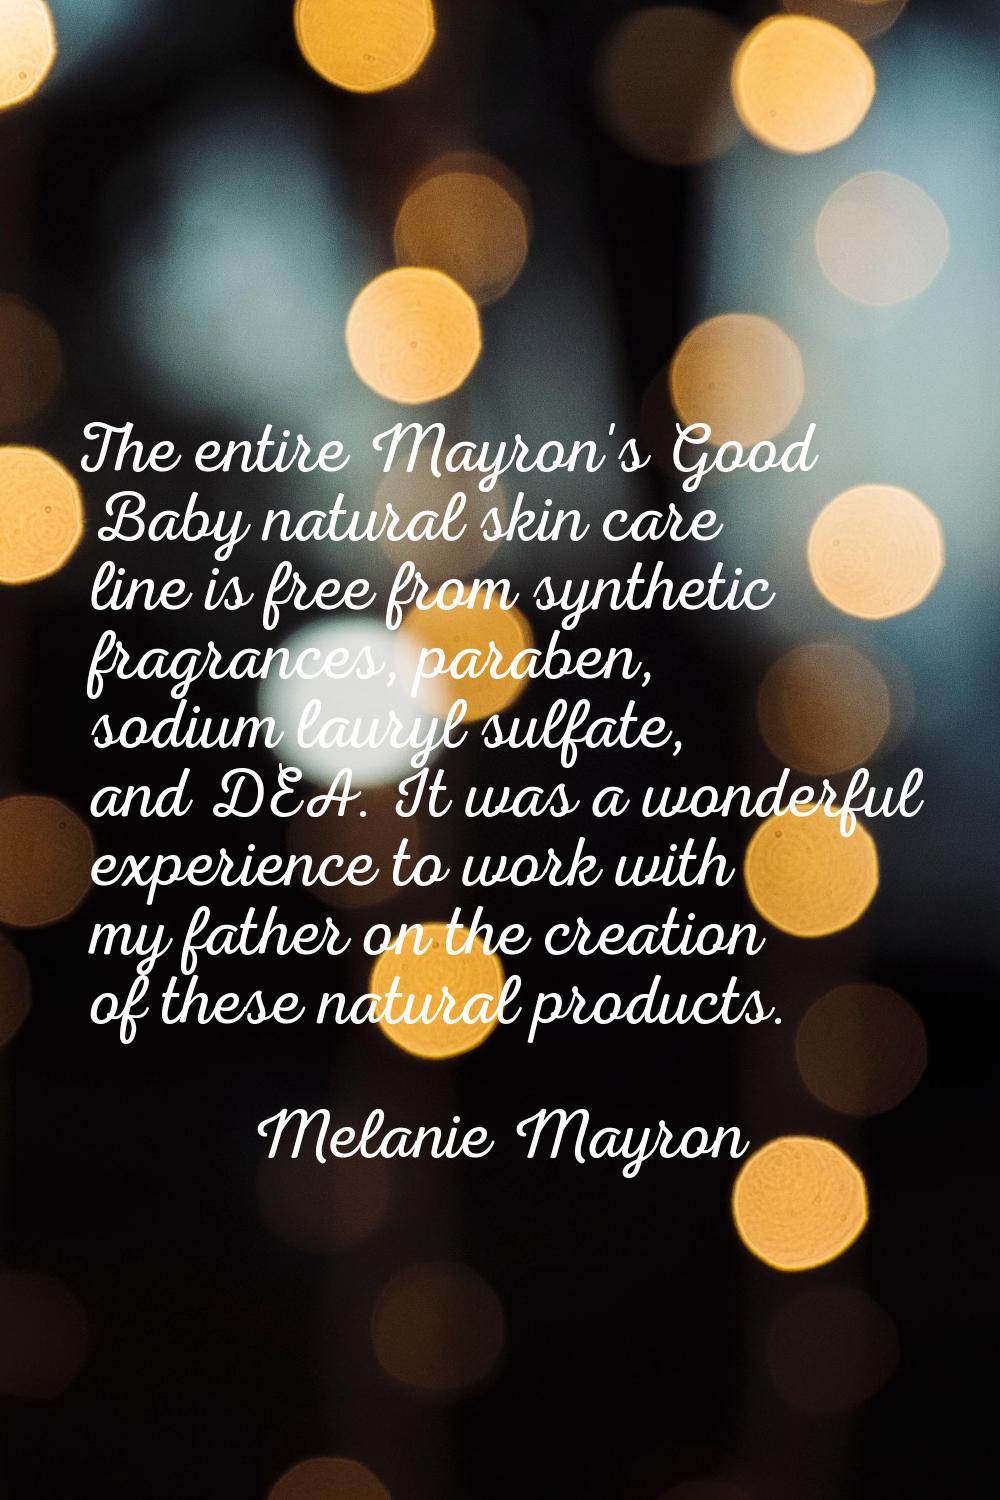 The entire Mayron's Good Baby natural skin care line is free from synthetic fragrances, paraben, so